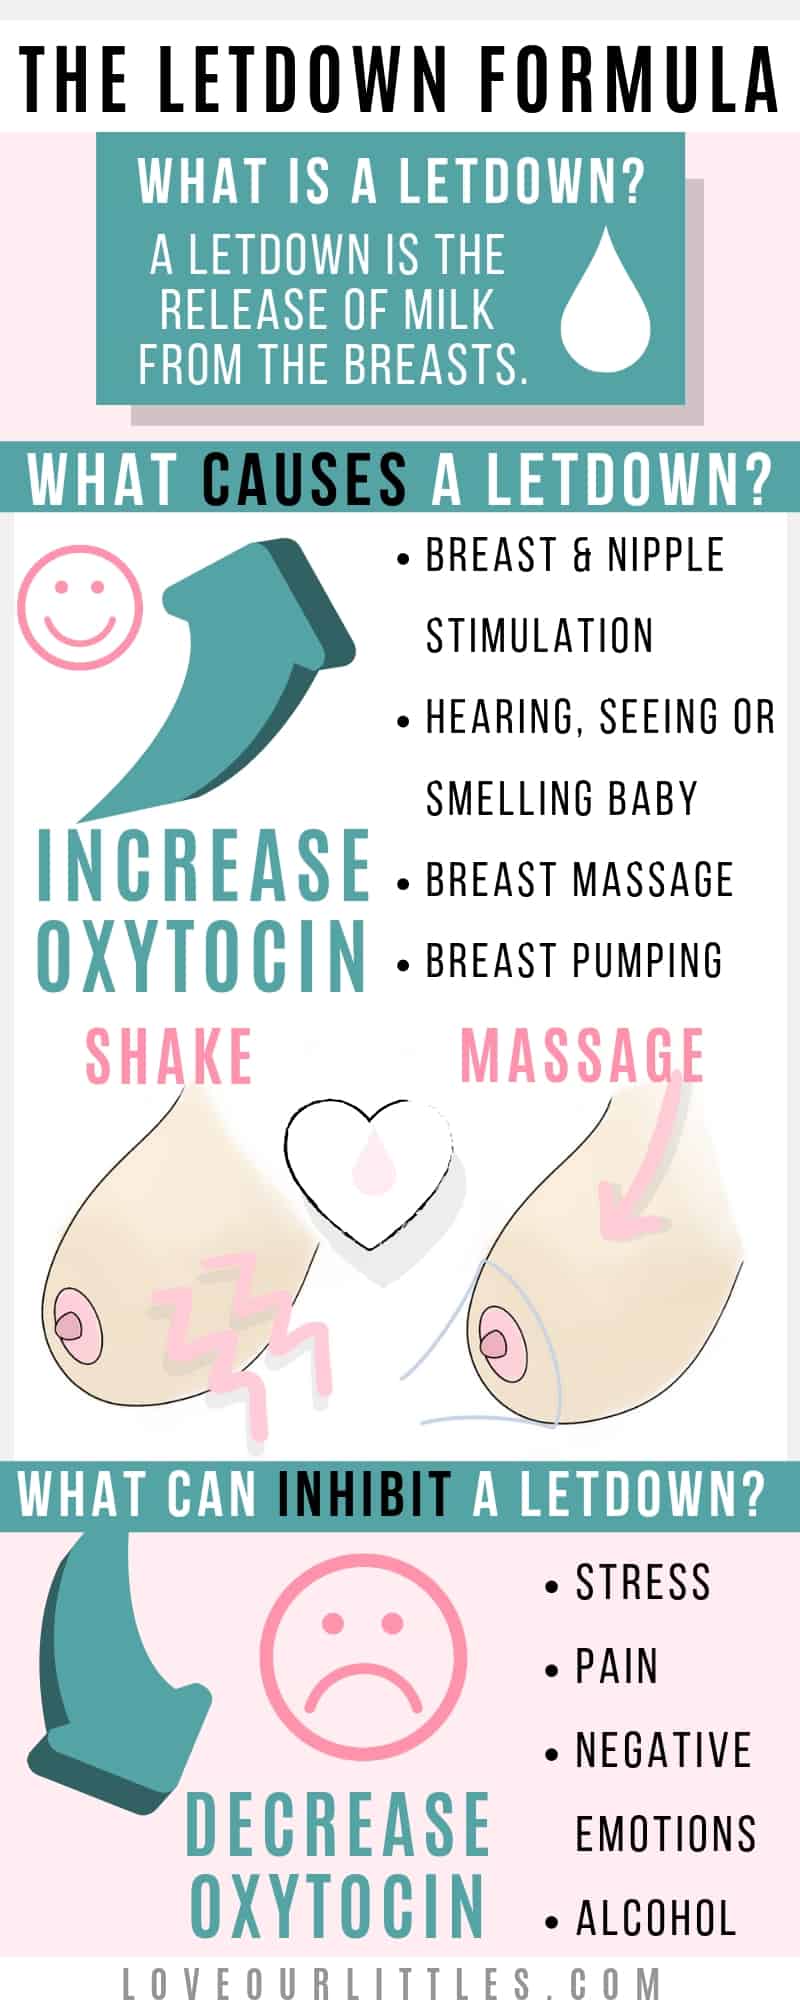 The formula of a letdown an infographic with arrows and breast illustrations in the colors green and pink.